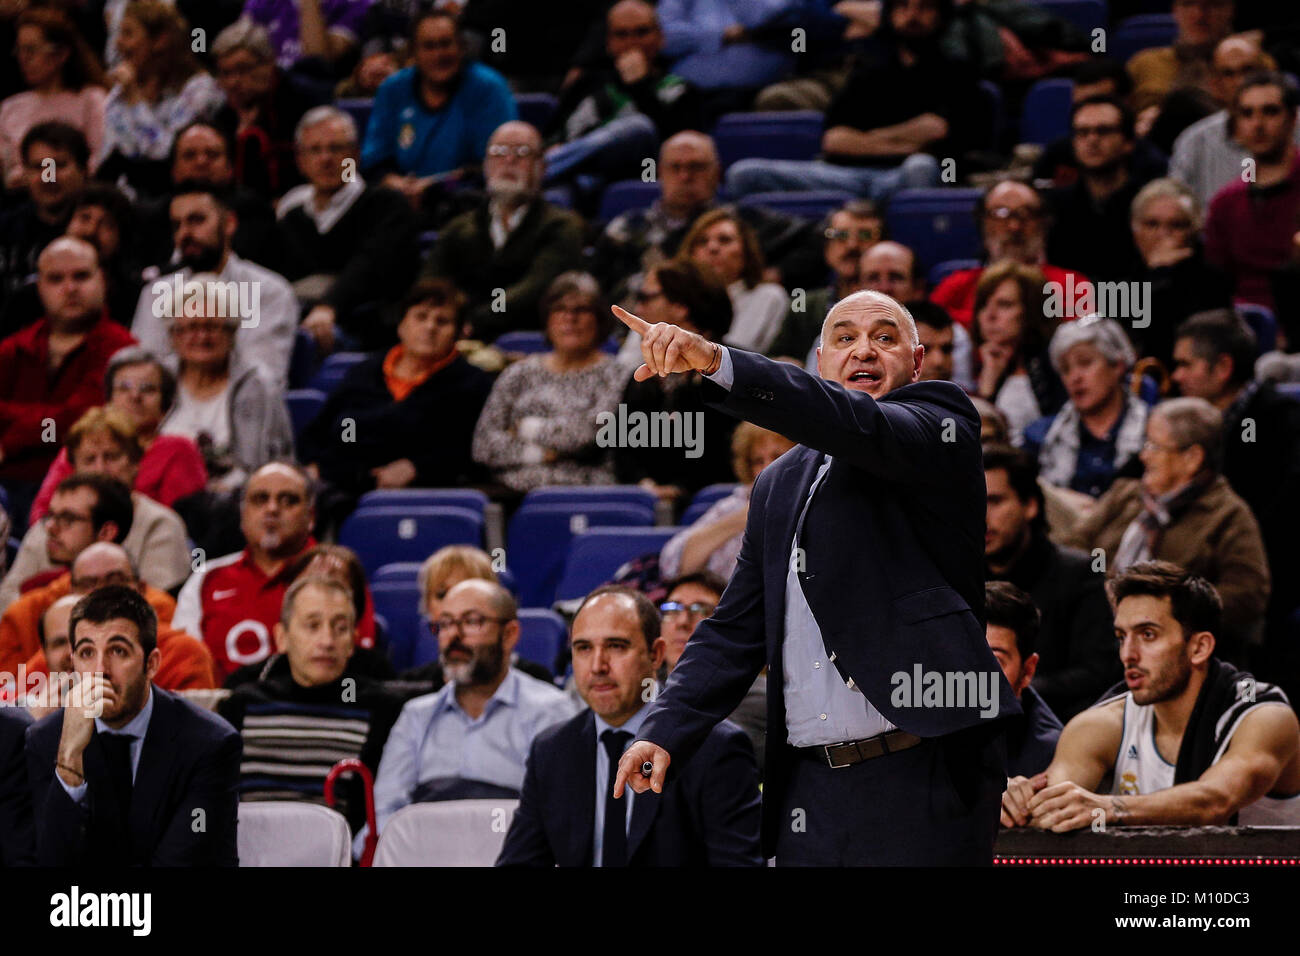 Pablo Laso Coach of Real Madrid Baloncesto Euroleague match between Real Madrid Baloncesto vs Anadolu Efes at the WiZink Center stadium in Madrid, Spain, January 25, 2018 . Credit: Gtres Información más Comuniación on line, S.L./Alamy Live News Stock Photo